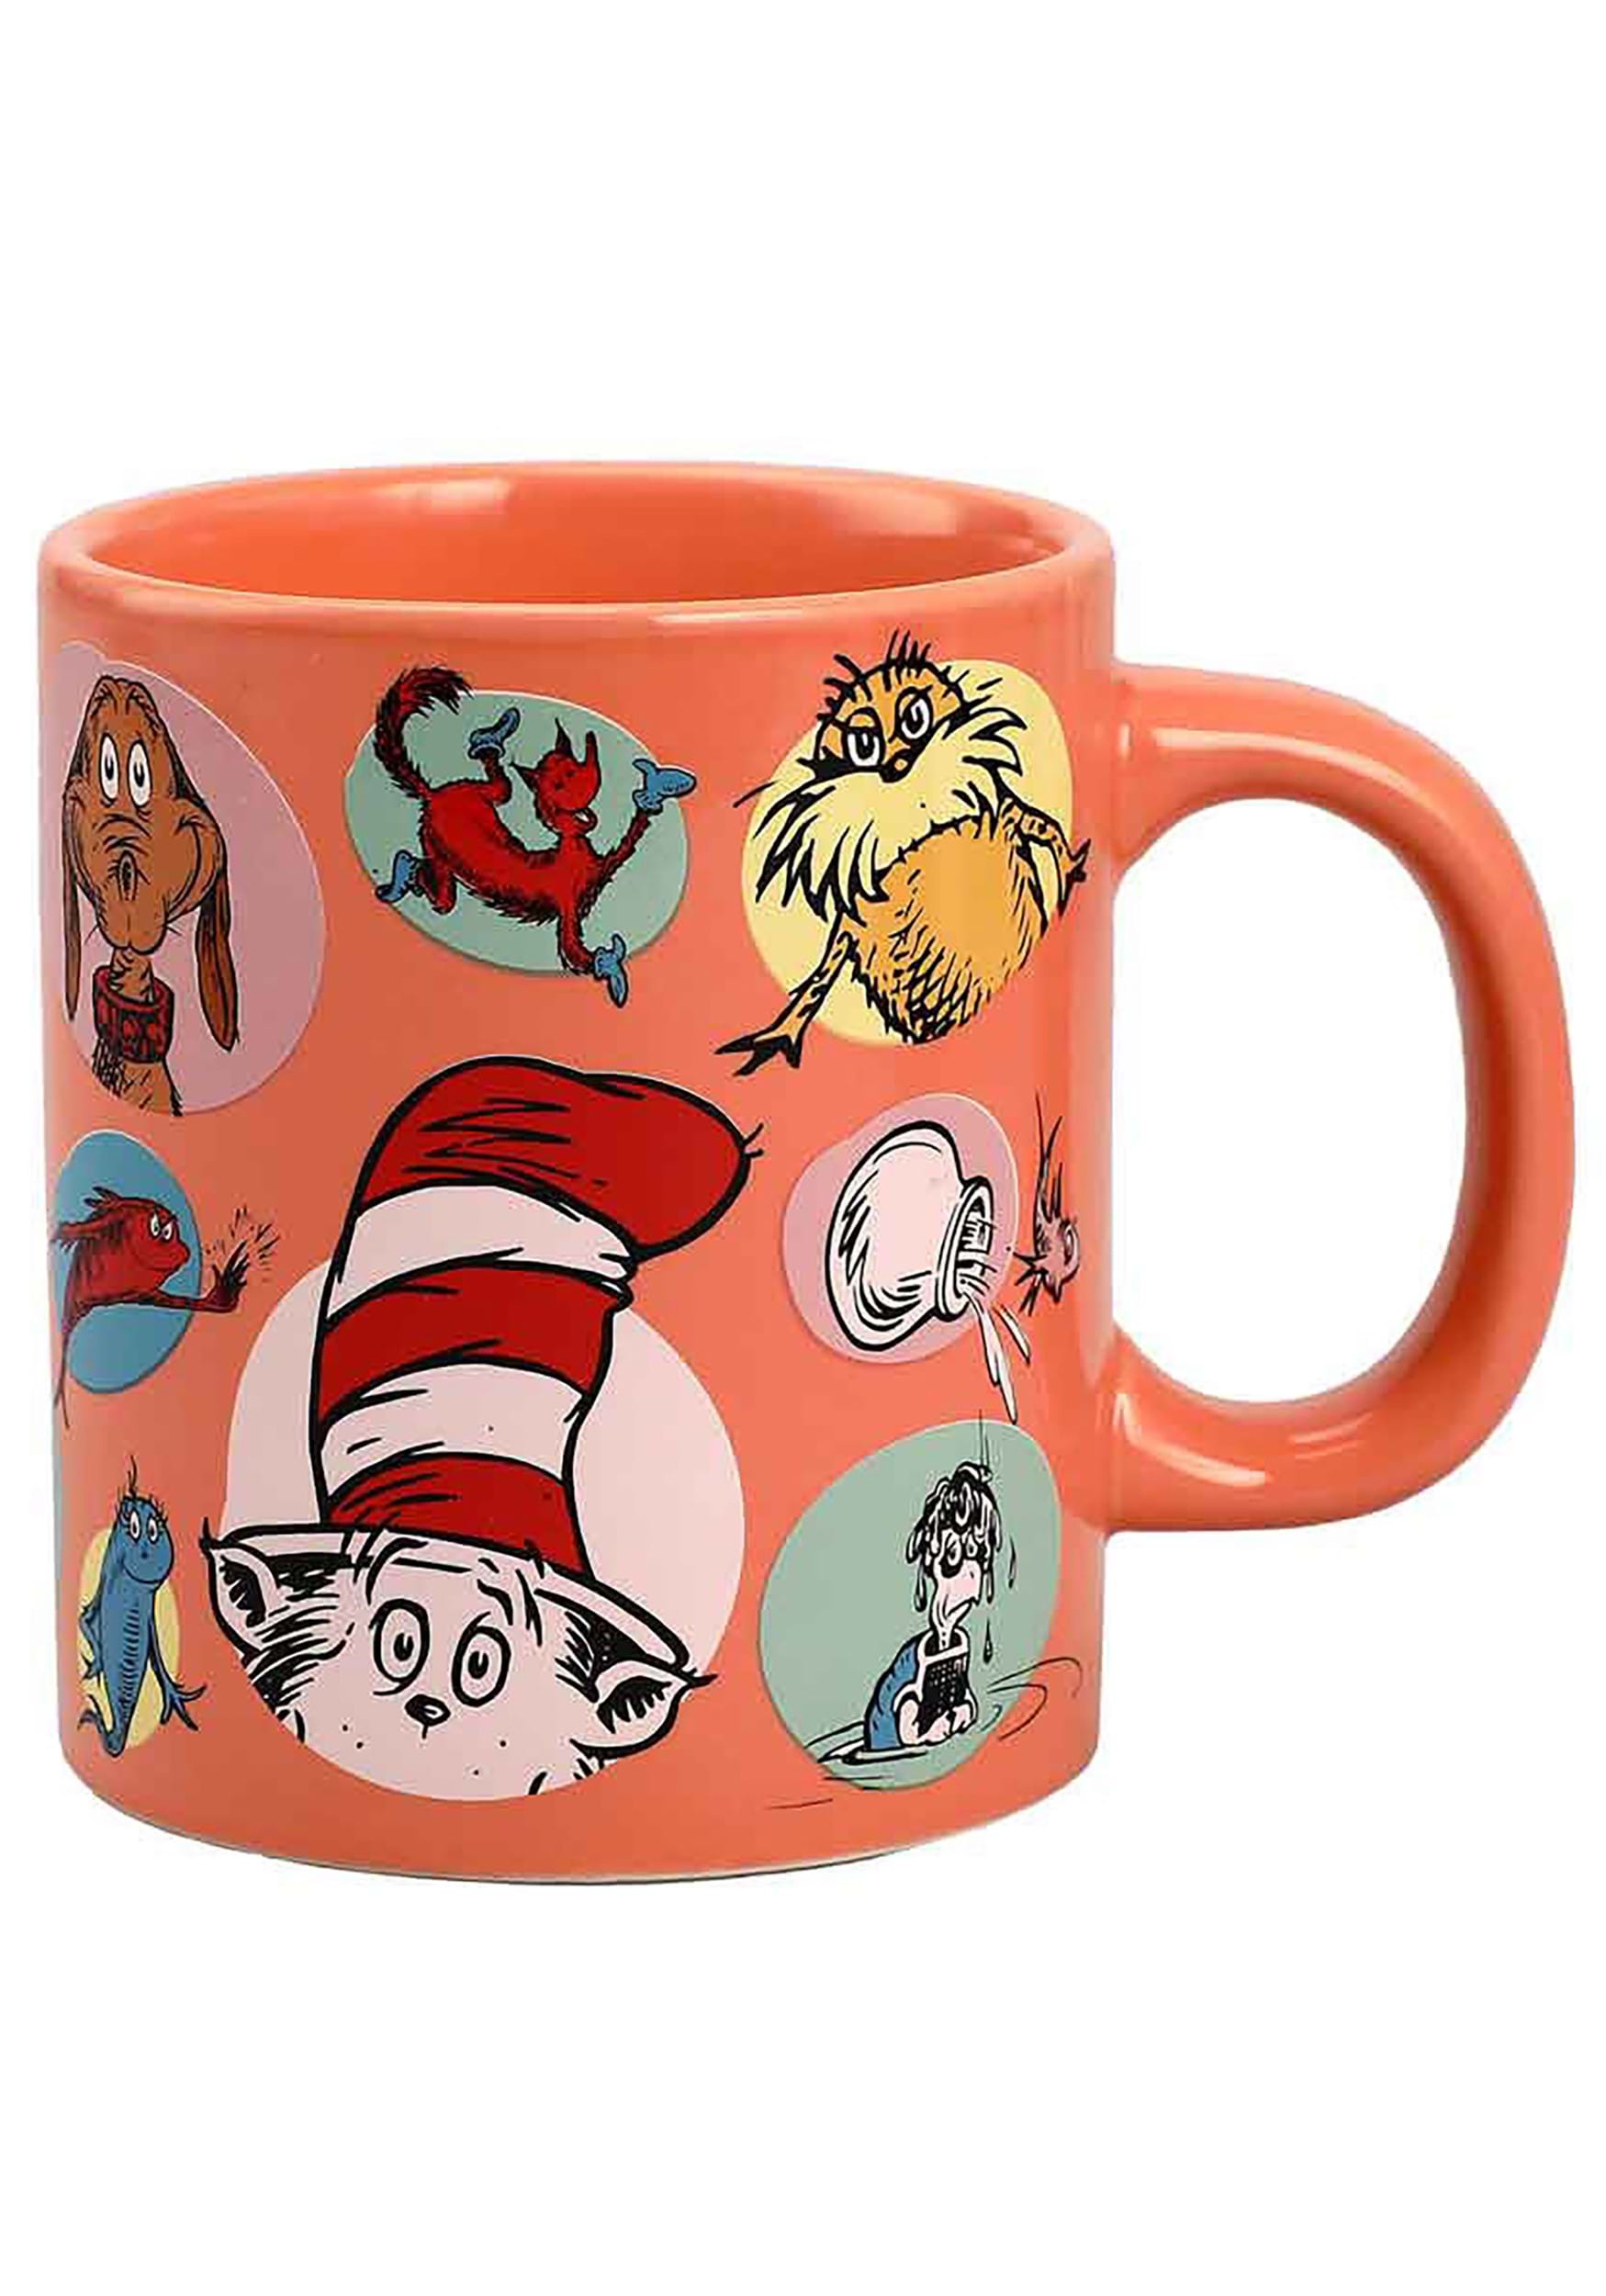 https://images.fun.com/products/84003/2-1-224837/dr-seuss-character-collection-16-oz-ceramic-coffee-mug-alt-1.jpg